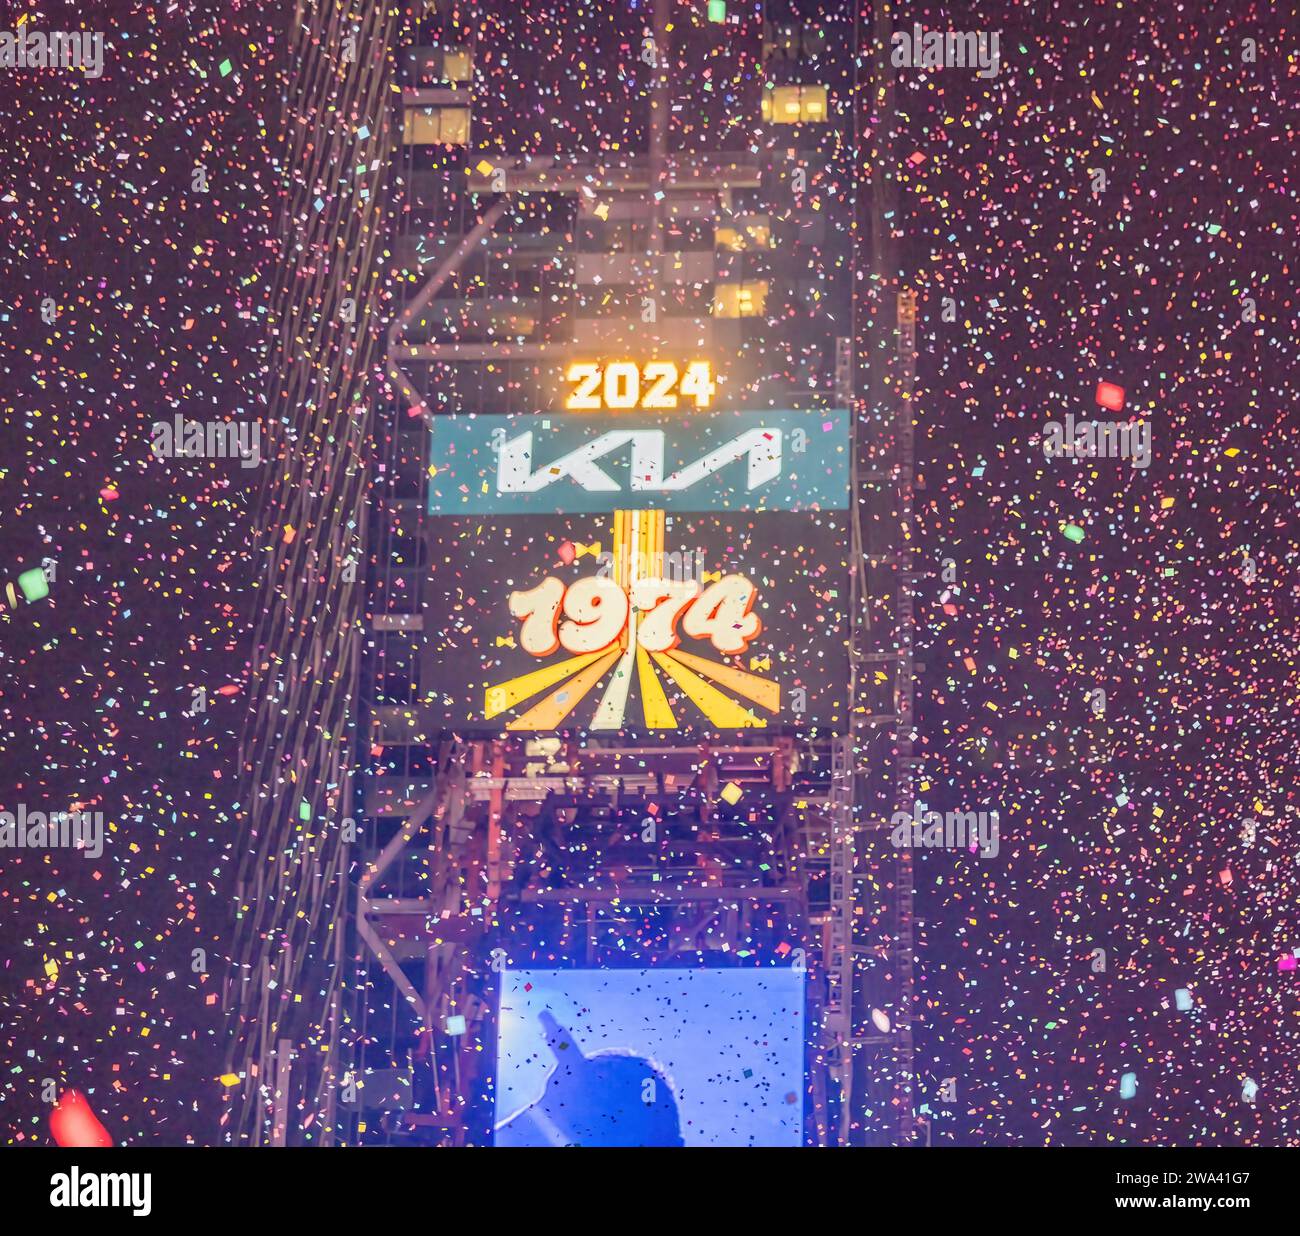 NEW YORK, N.Y. – January 1, 2024: Confetti falls over Times Square in the opening moments of 2024. Stock Photo